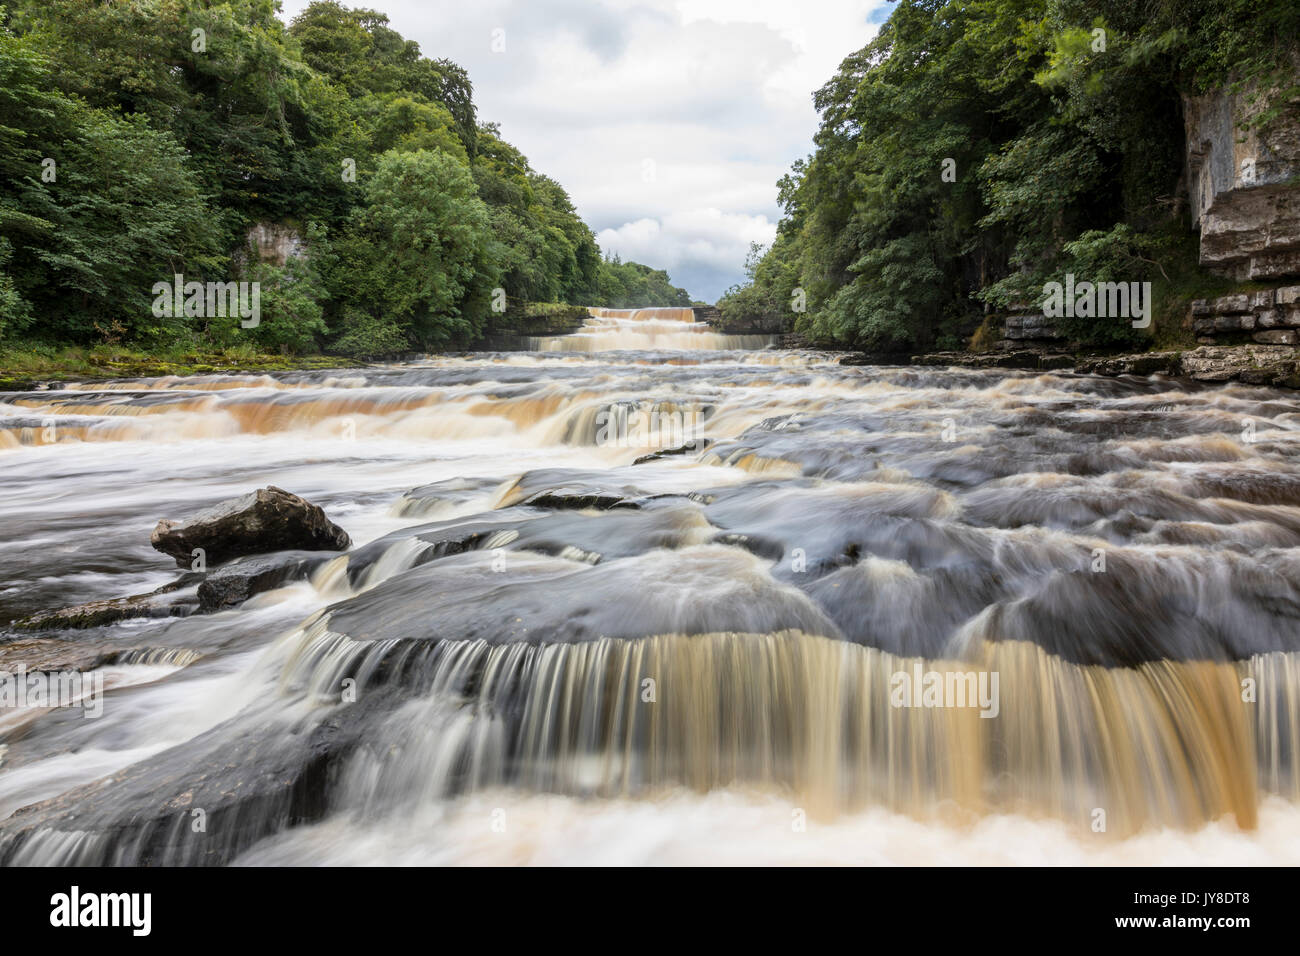 Aysgarth Falls, Lower Force Waterfall, River Ure Yorkshire Dales National Park Stock Photo